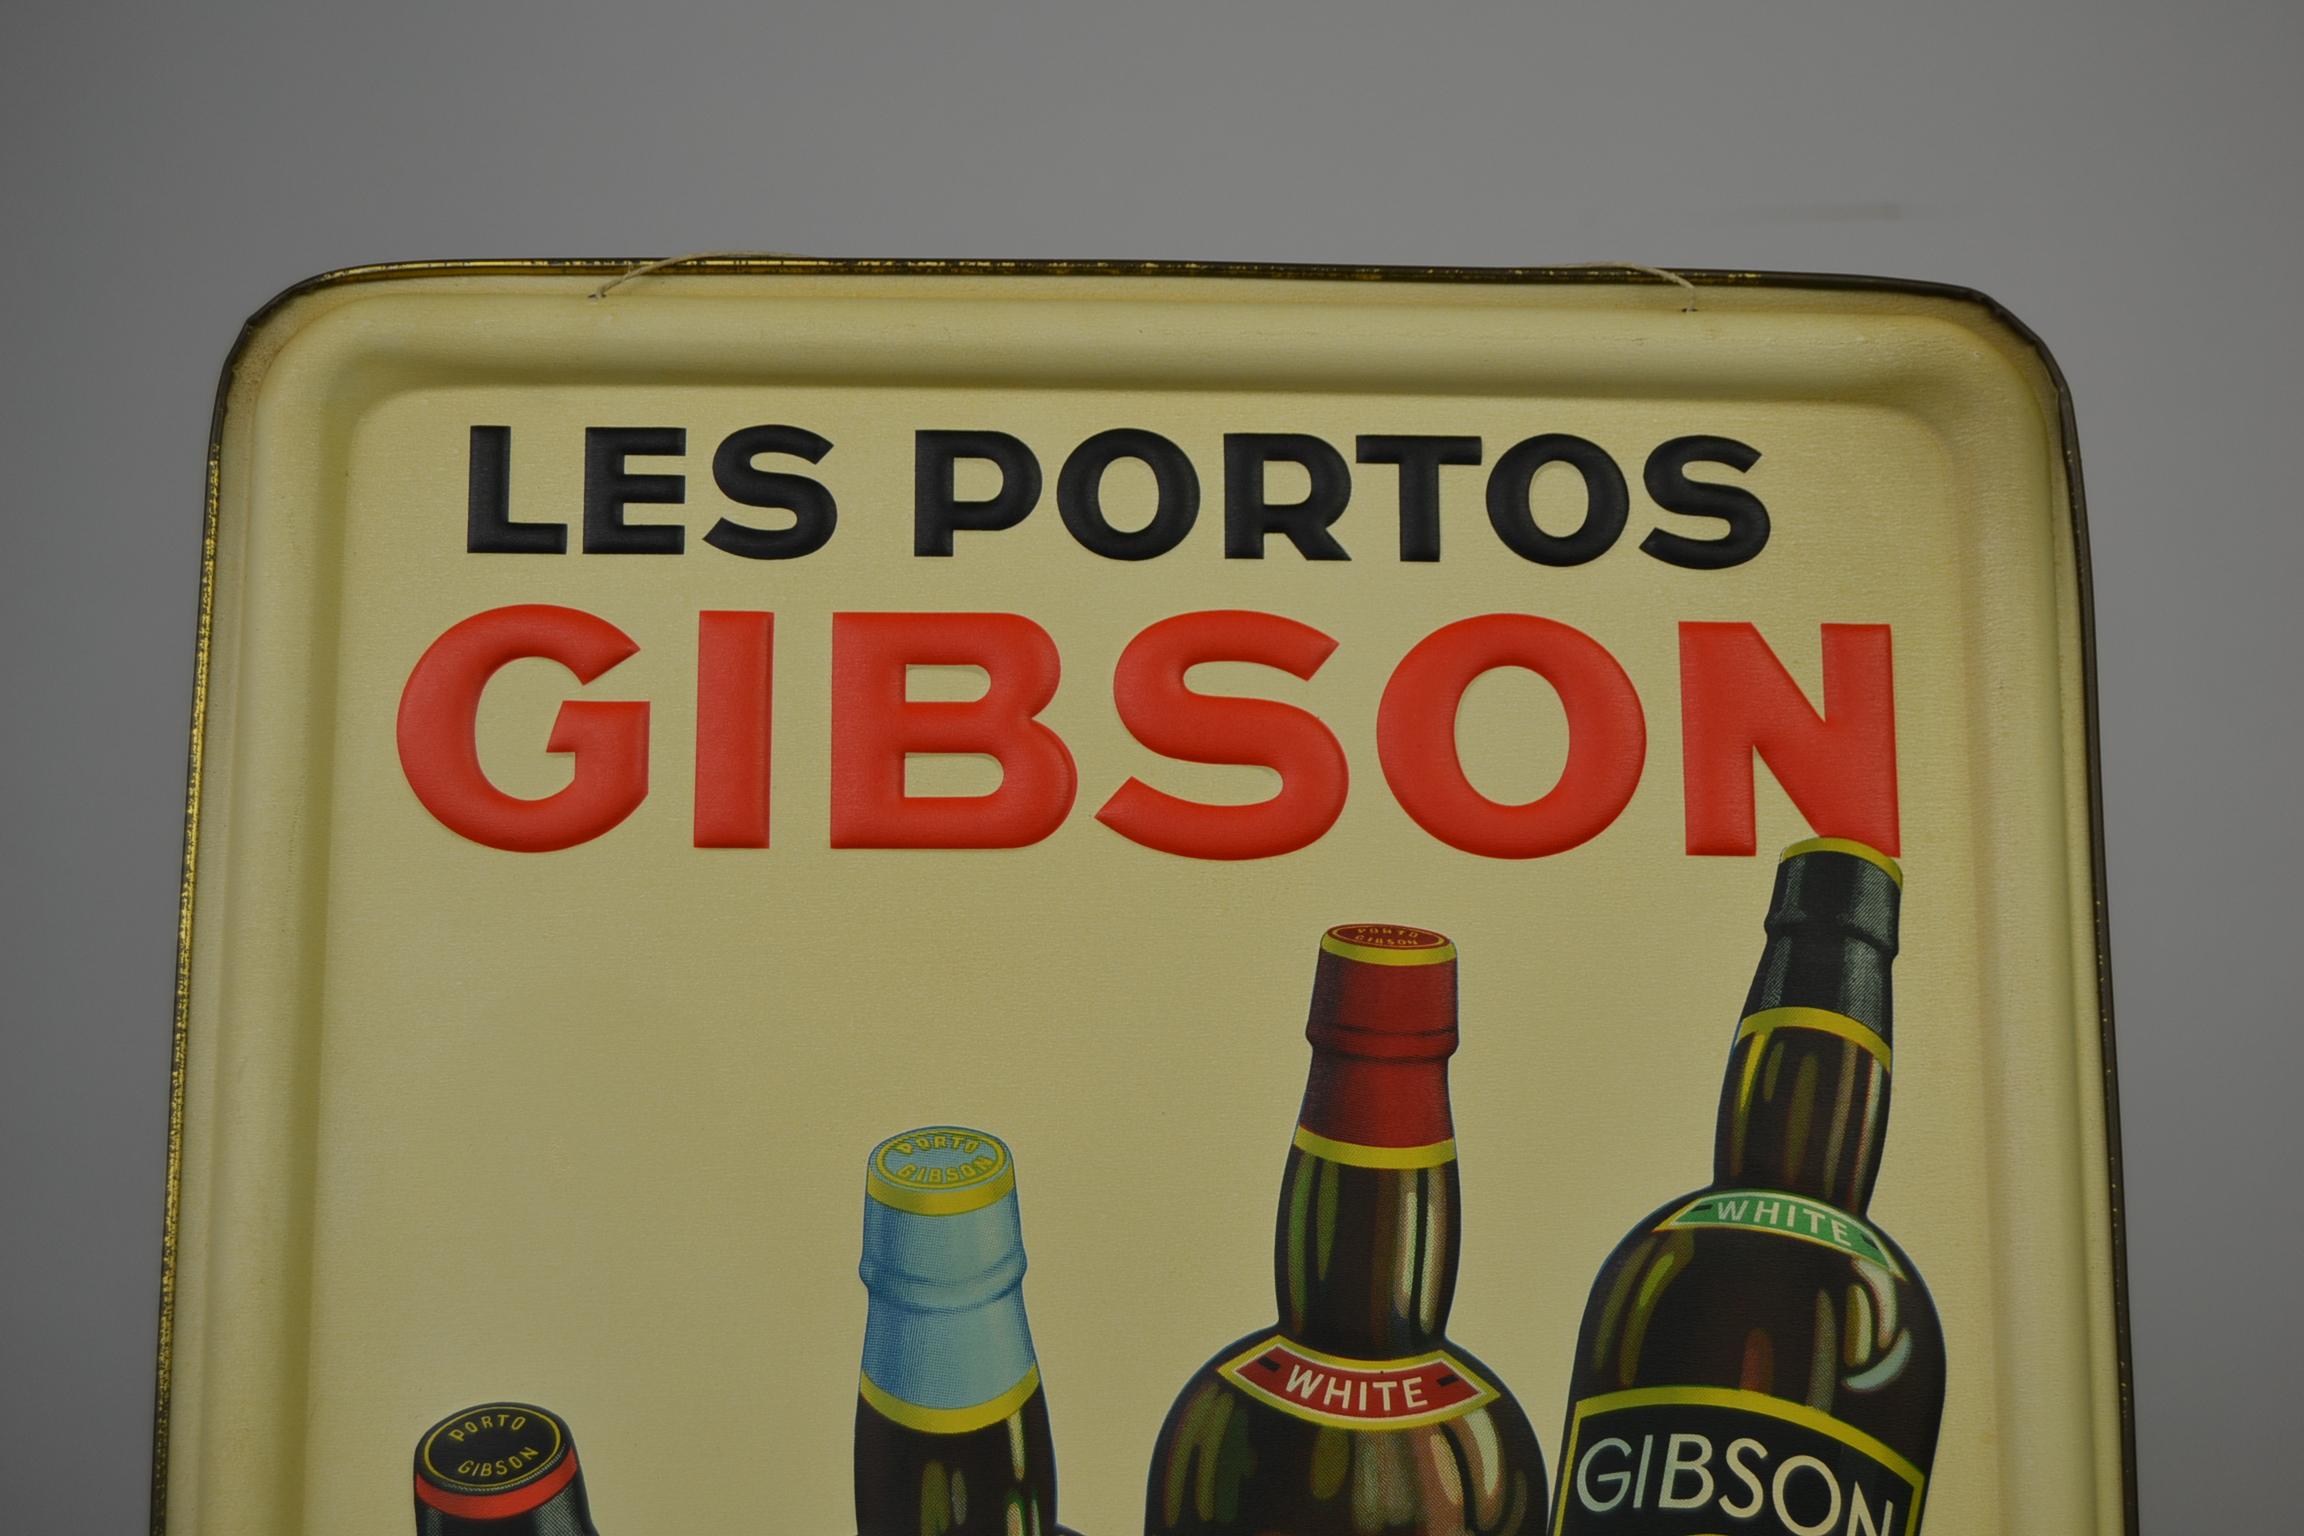 Suberb tin sign for Les Portos Gibson.
This old sign for the Appetizer Drink Gibson's Port
is dated 1936 and was made by the Company Jofico Brussels Belgium. 

For that period a modern advertising sign for the four different White Gibsons's